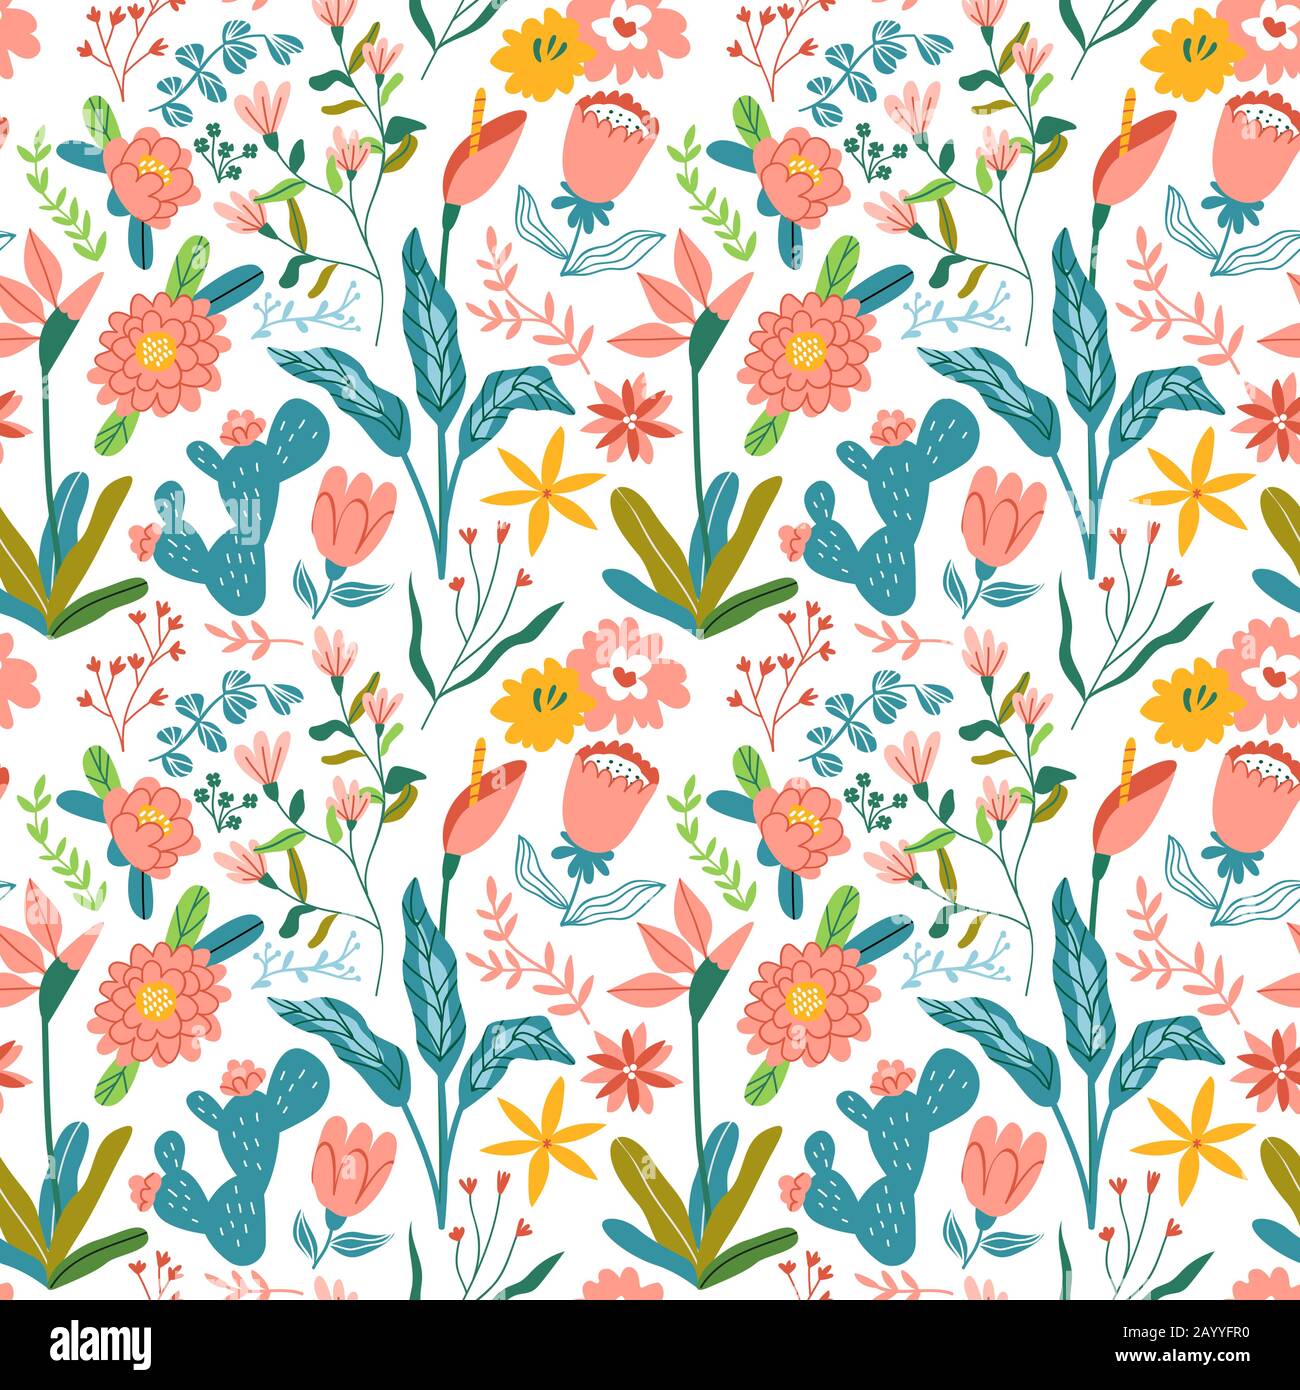 Beautiful flower seamless pattern with vintage style floral hand drawn decoration. Includes rose, cactus, tulip flowers and spring elements on white b Stock Vector